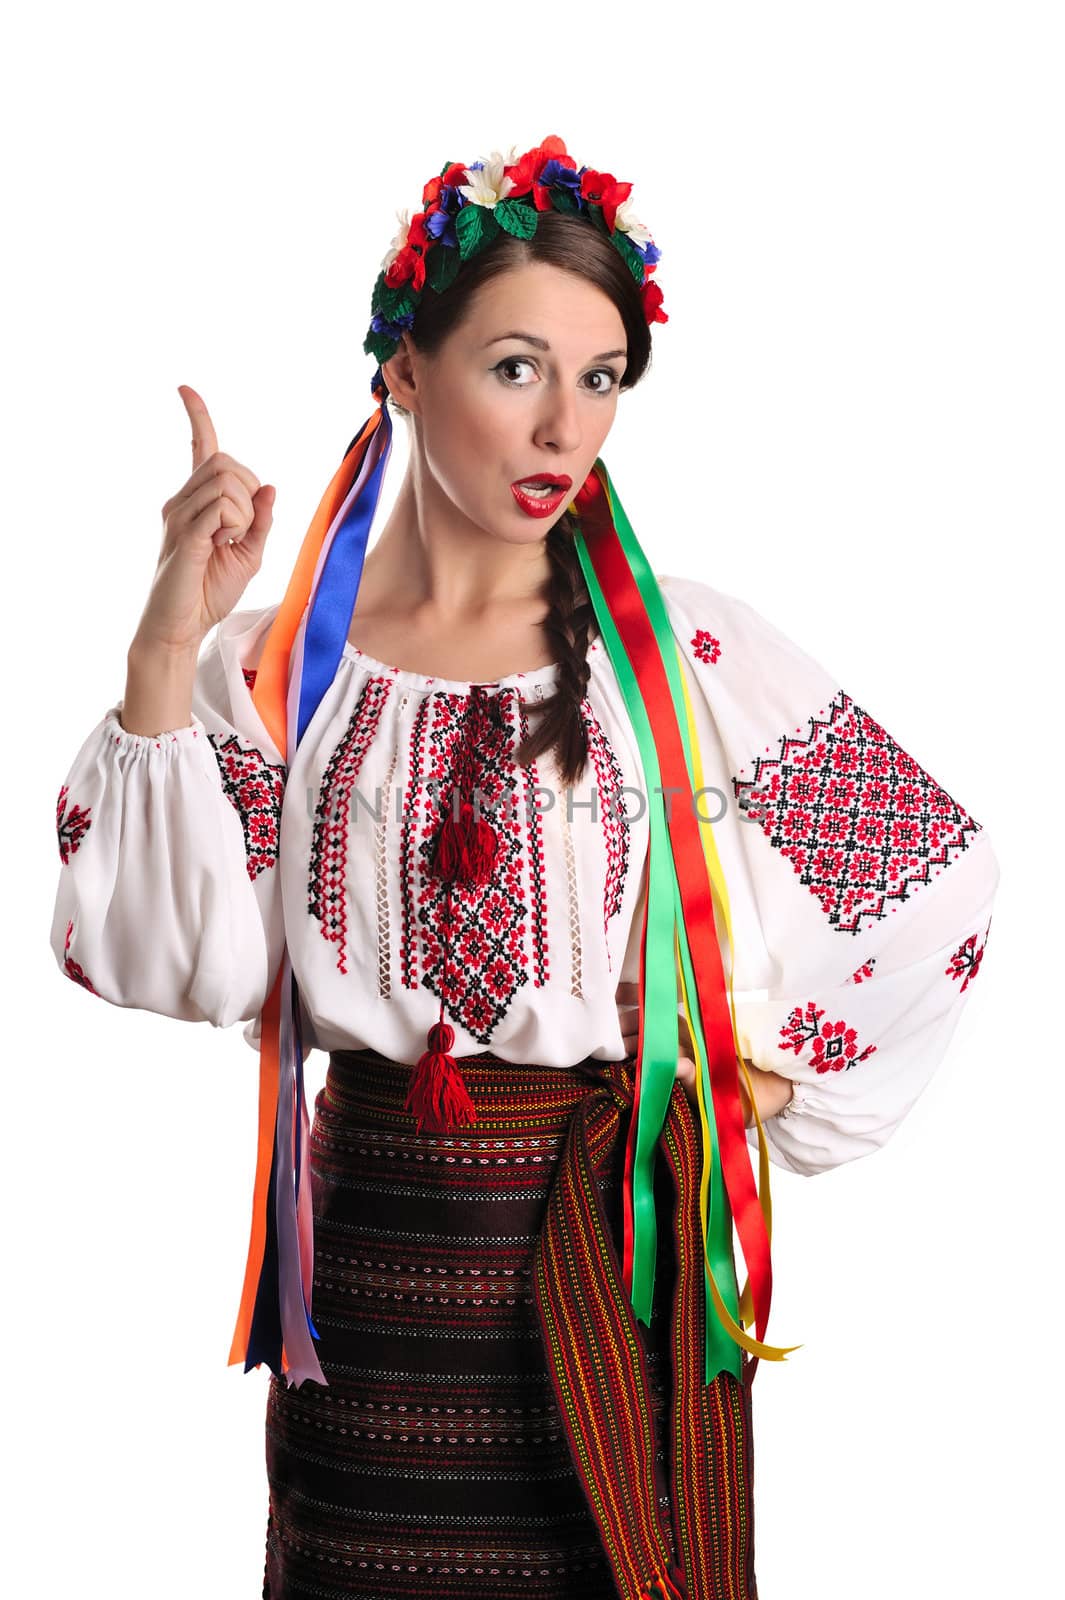 Ukrainian woman in national costume by kirs-ua